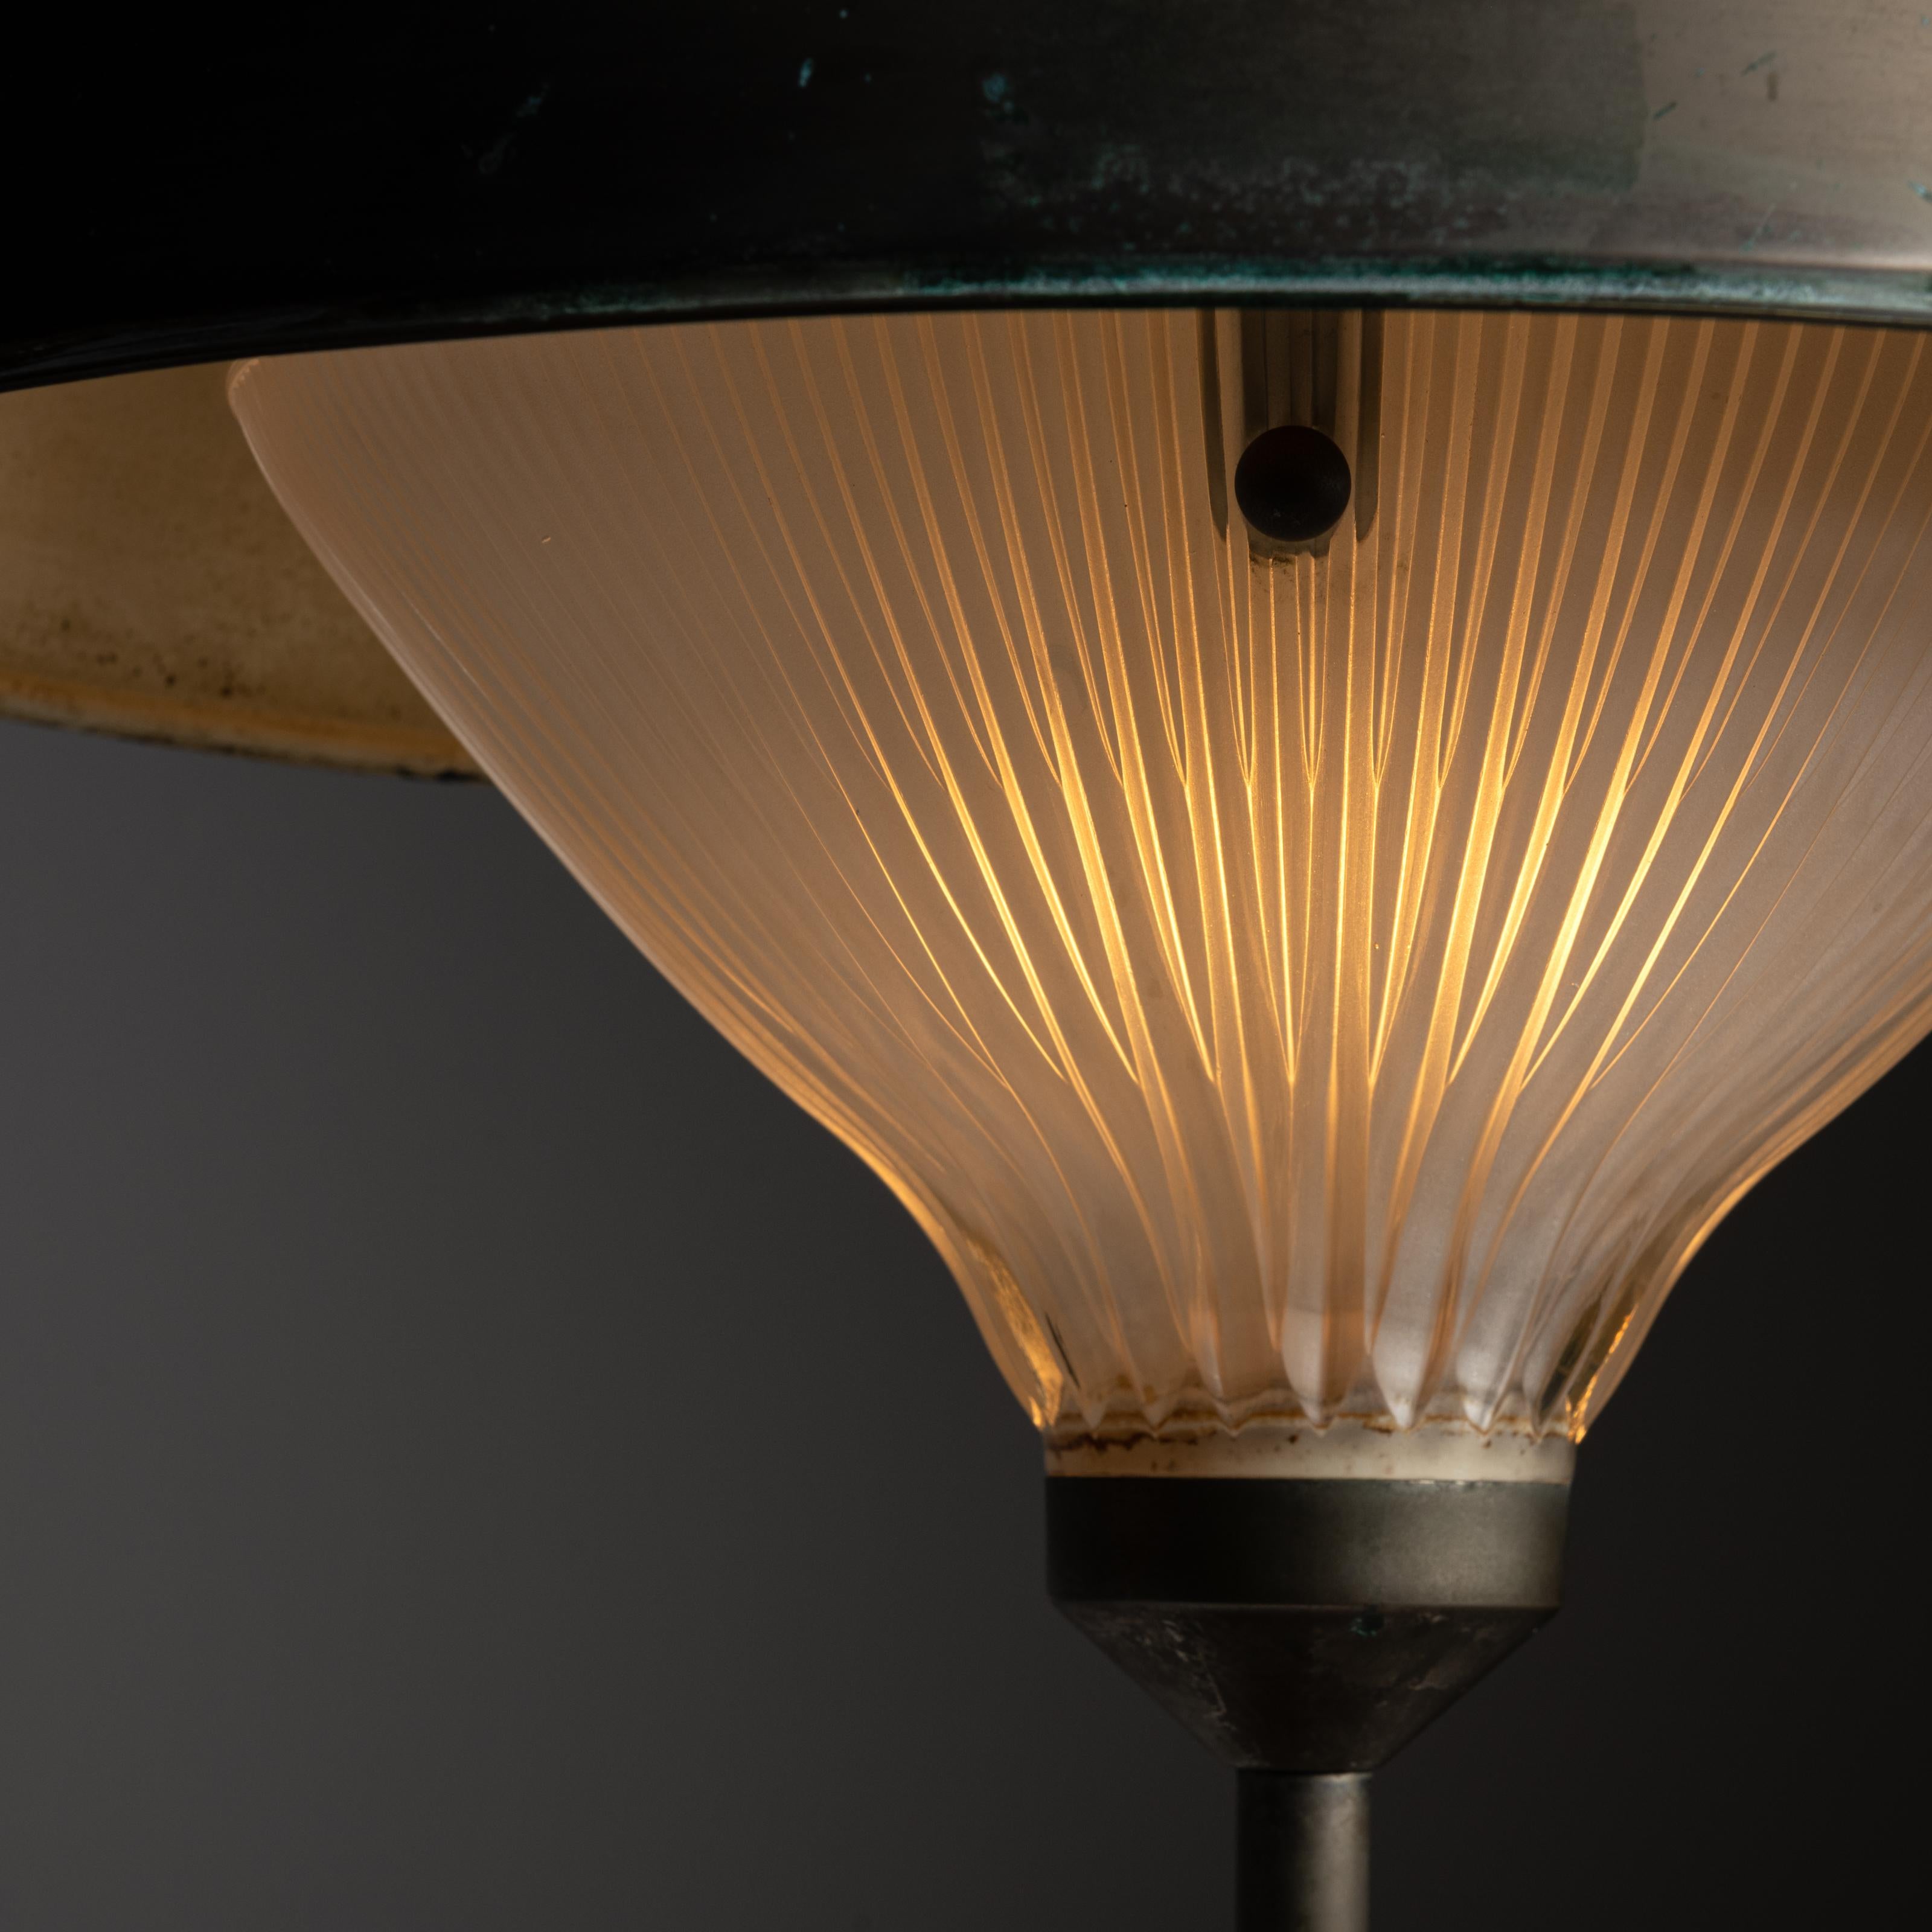 'Ro' table lamp by Studio BBPR for Artemide. Designed and manufactured in Italy, 1963. Metal umbrella shape with beveled tear drop reeded glass. The lamp features an extrusion of the beveled glass on the center top of the frame. Holds one E14 socket